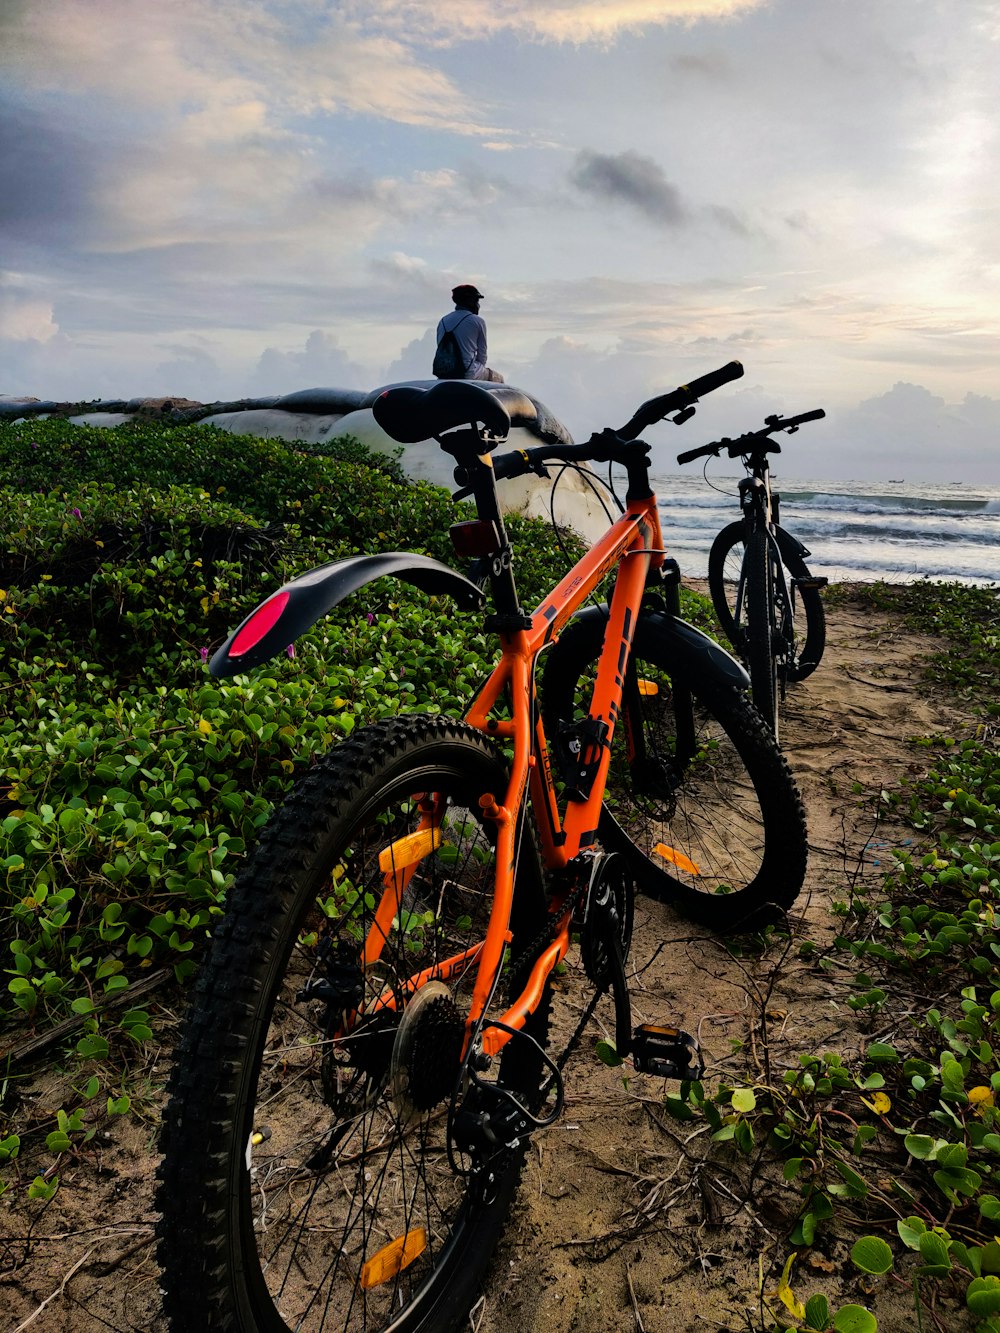 black and orange mountain bike on green grass field near body of water during daytime